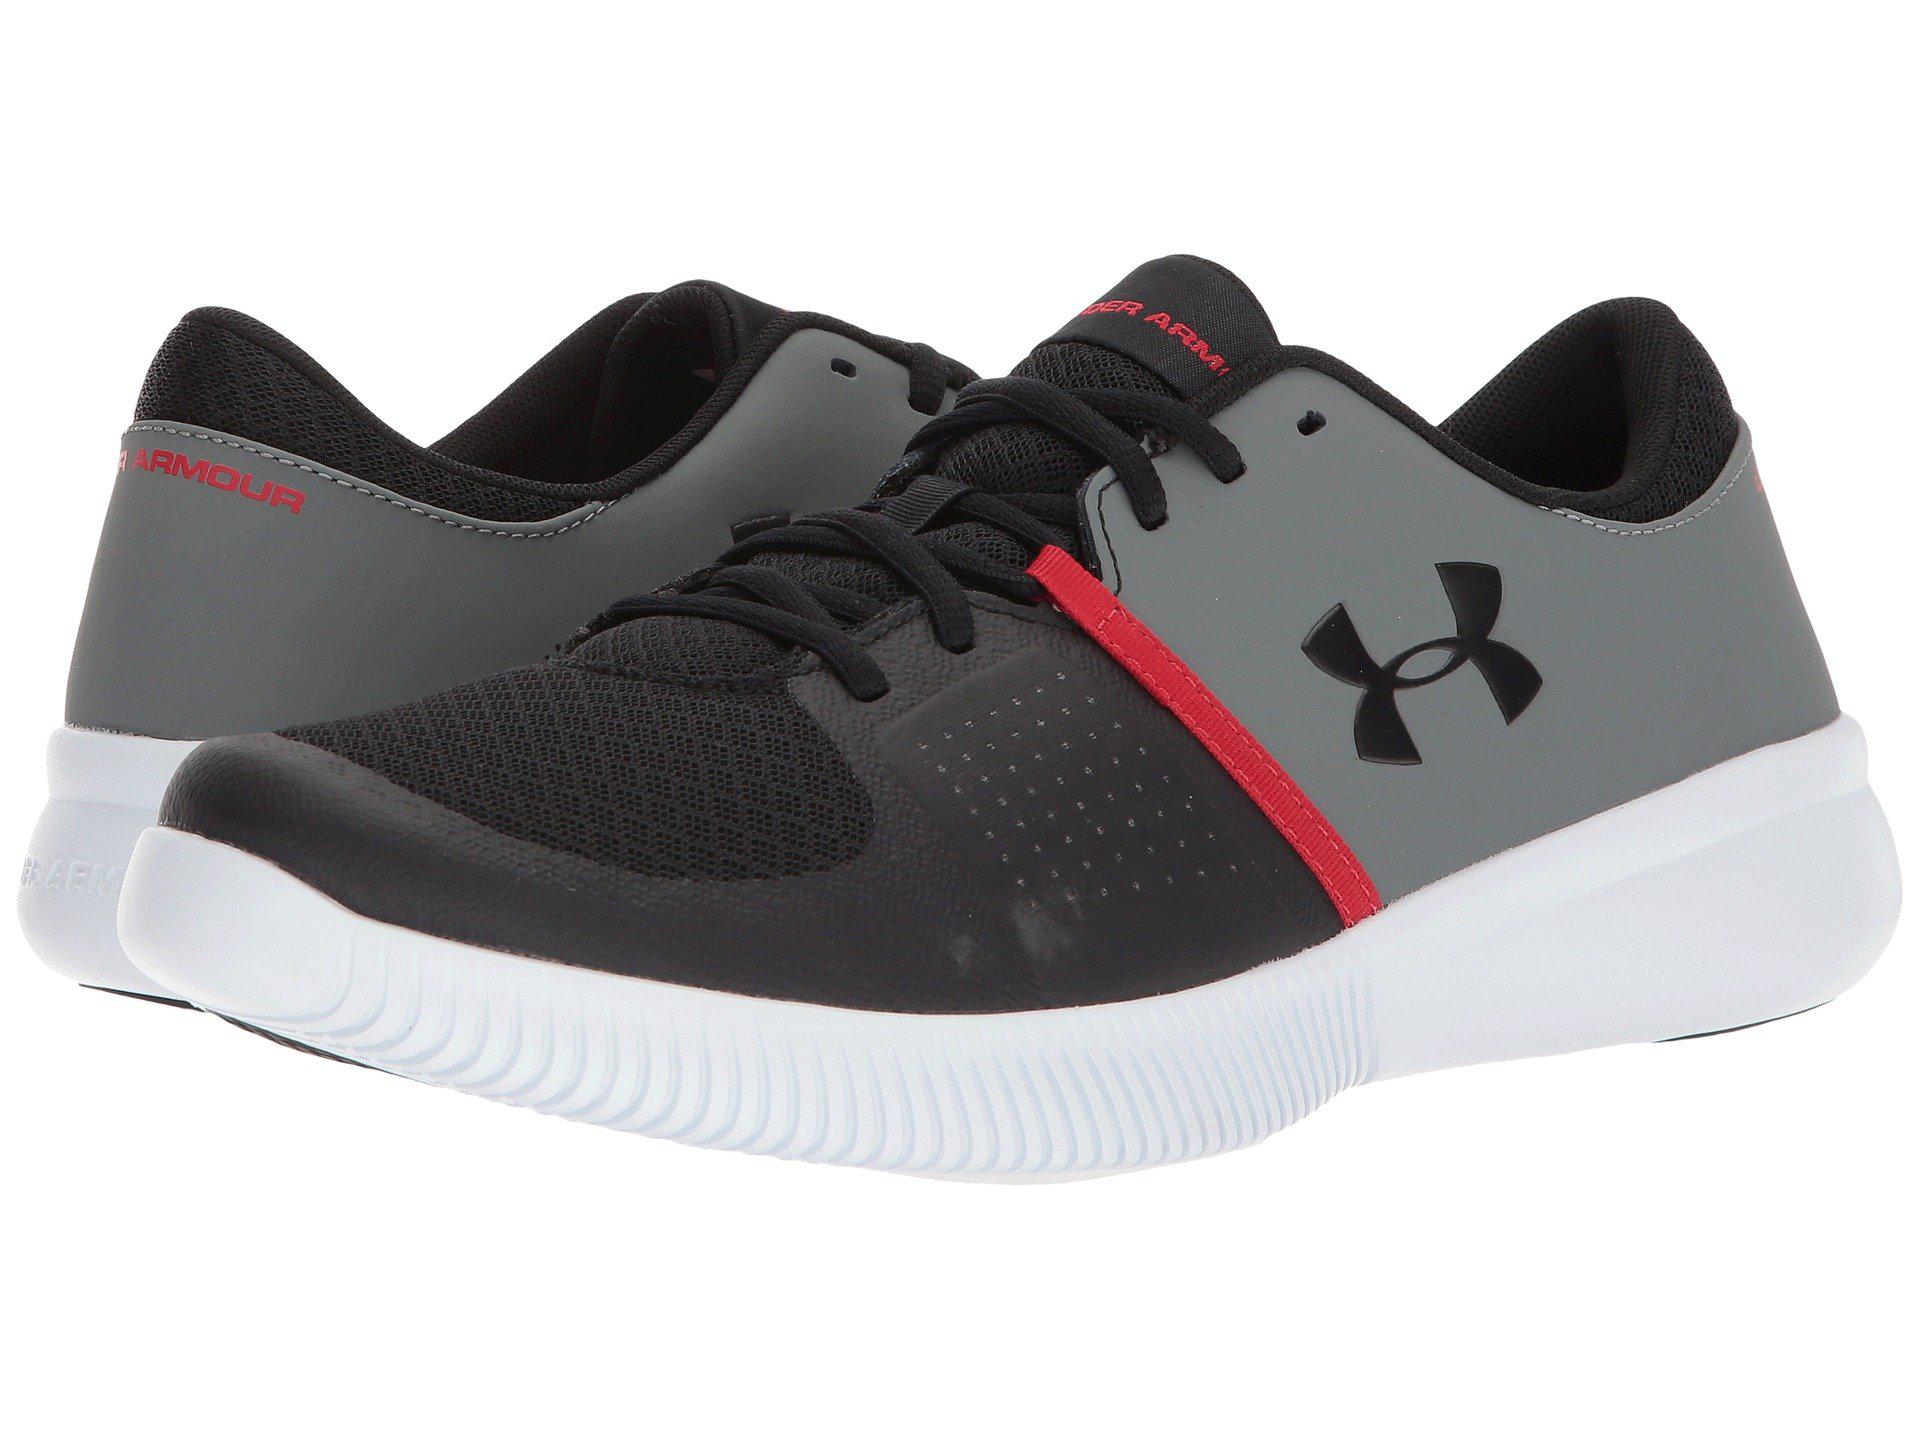 Under Armour Synthetic Ua Zone 3 in 